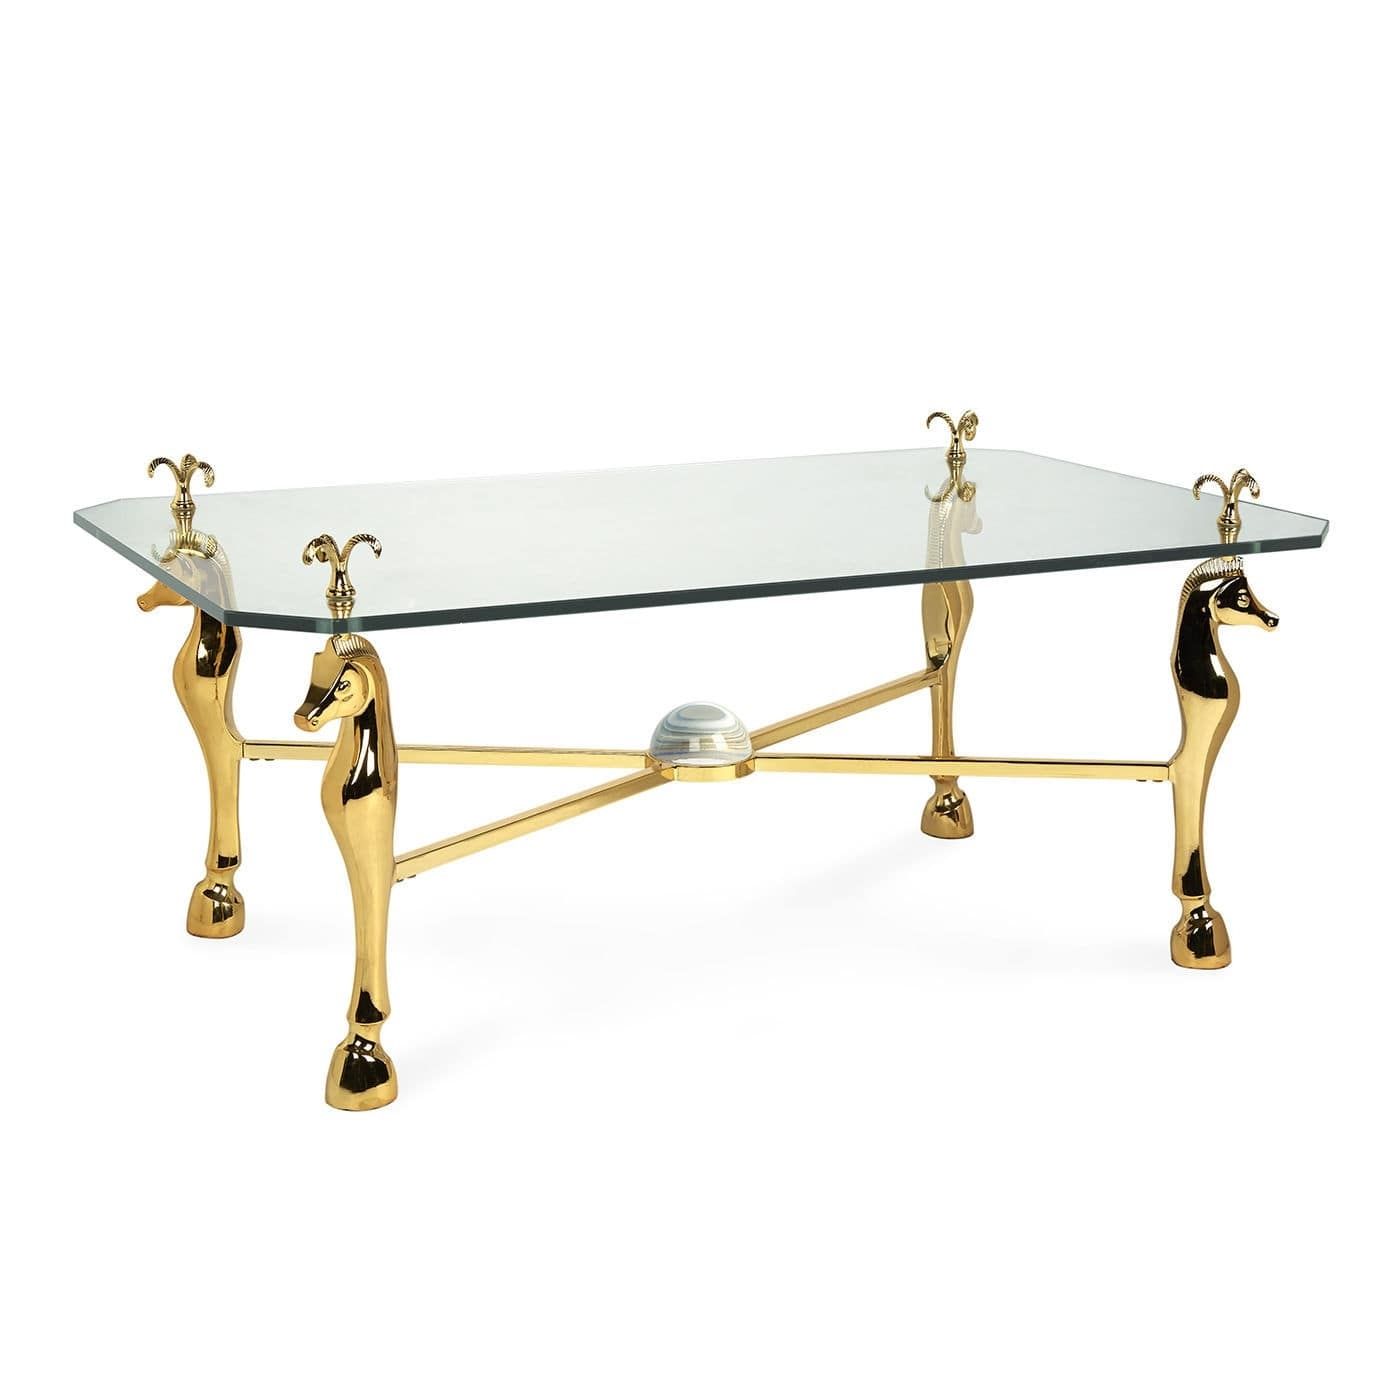 French Style Coffee Table / Tempered Glass / Polished Brass Intended For Acrylic Glass And Brass Coffee Tables (View 9 of 30)